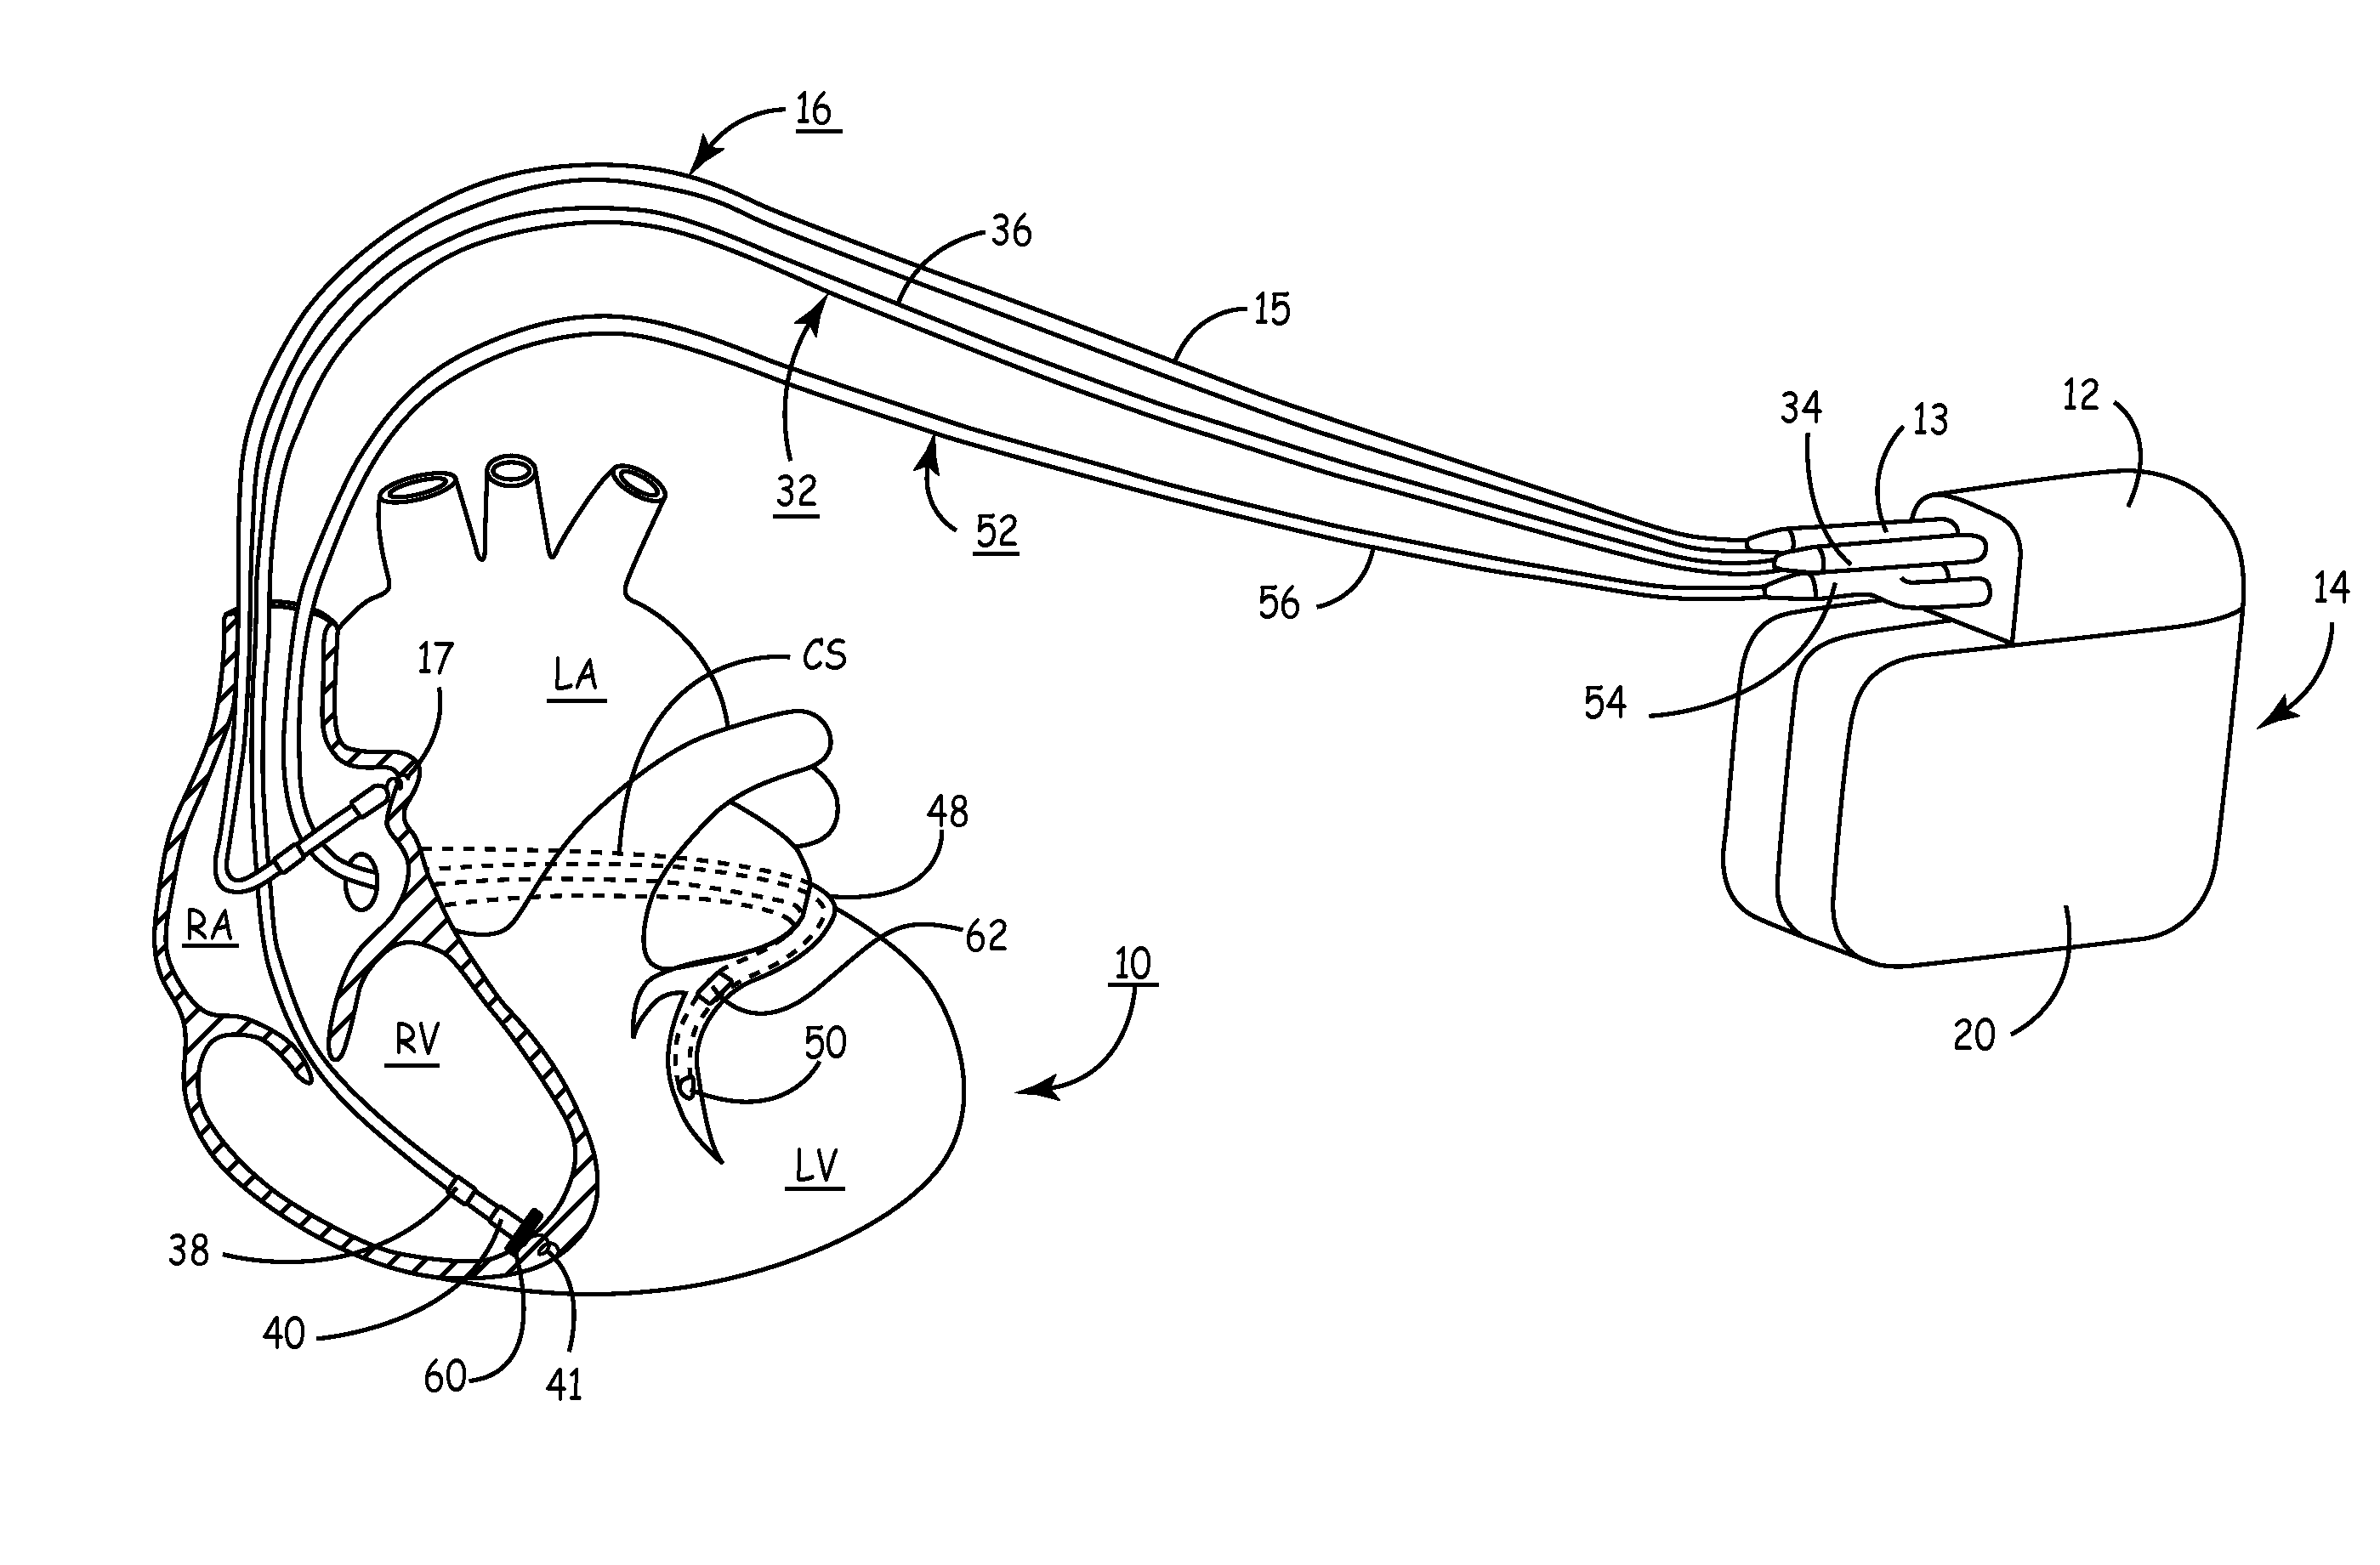 System and method for conditional biventricular pacing